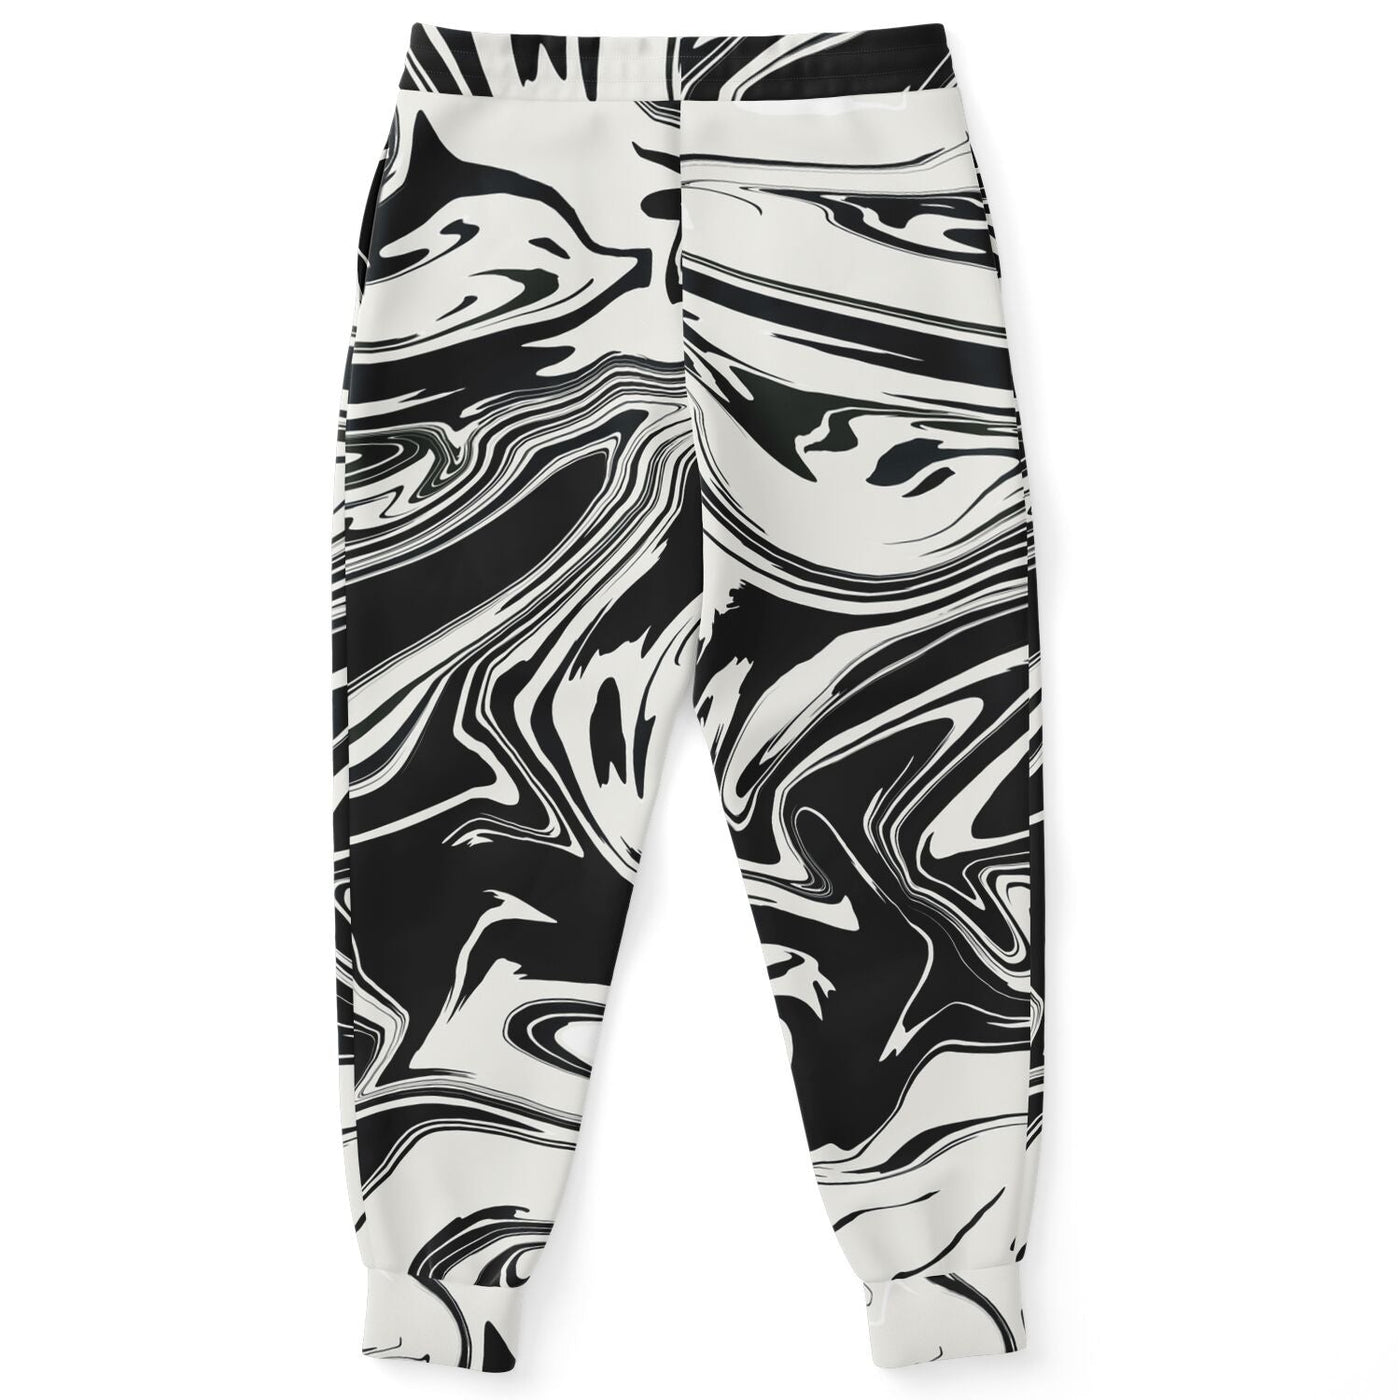 Wavy Black & White Abstract Psychedelic Pattern Fashion Jogger